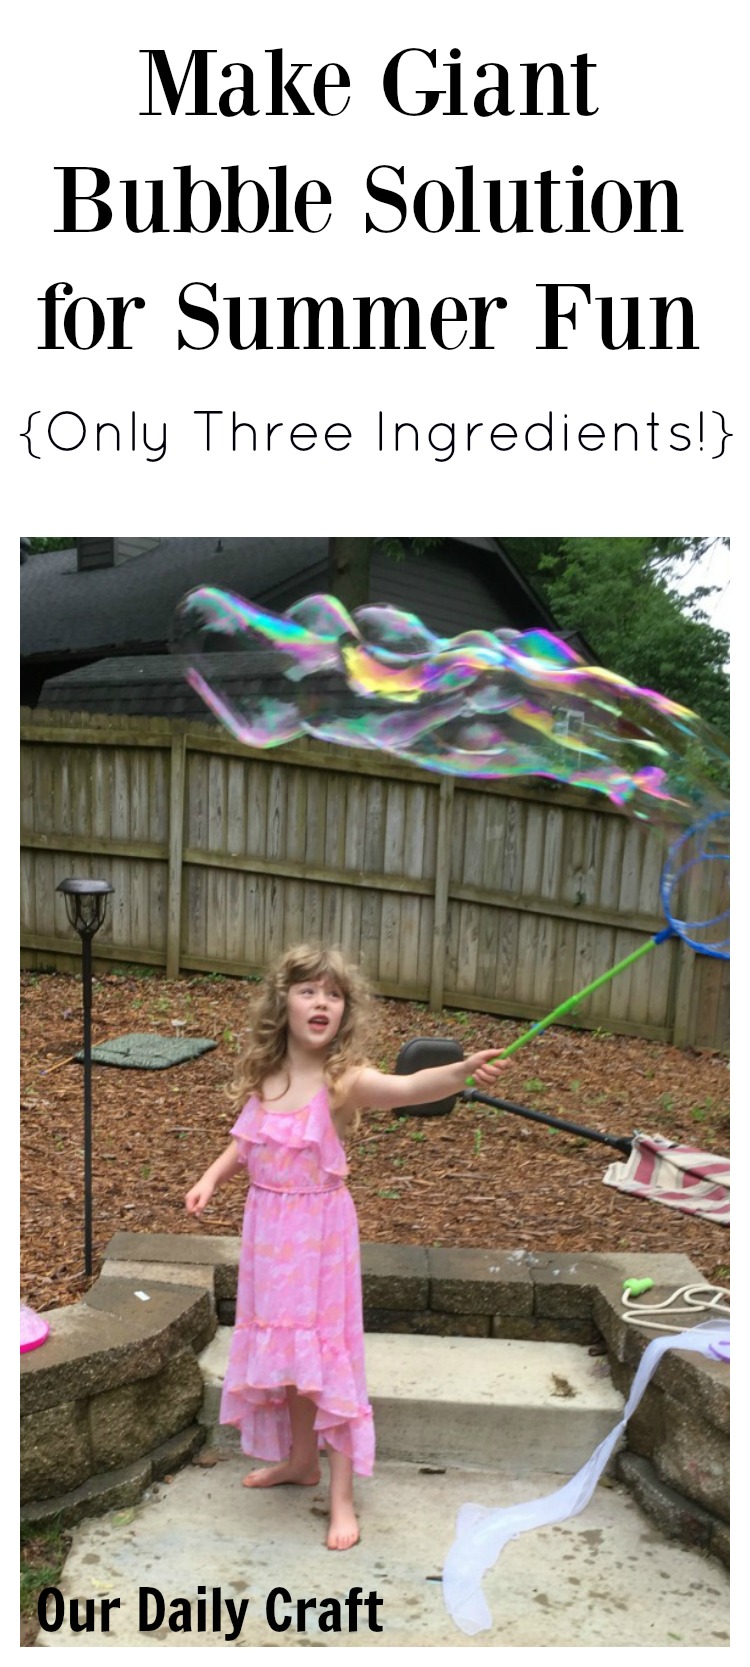 Make Giant Bubble Solution in a Flash